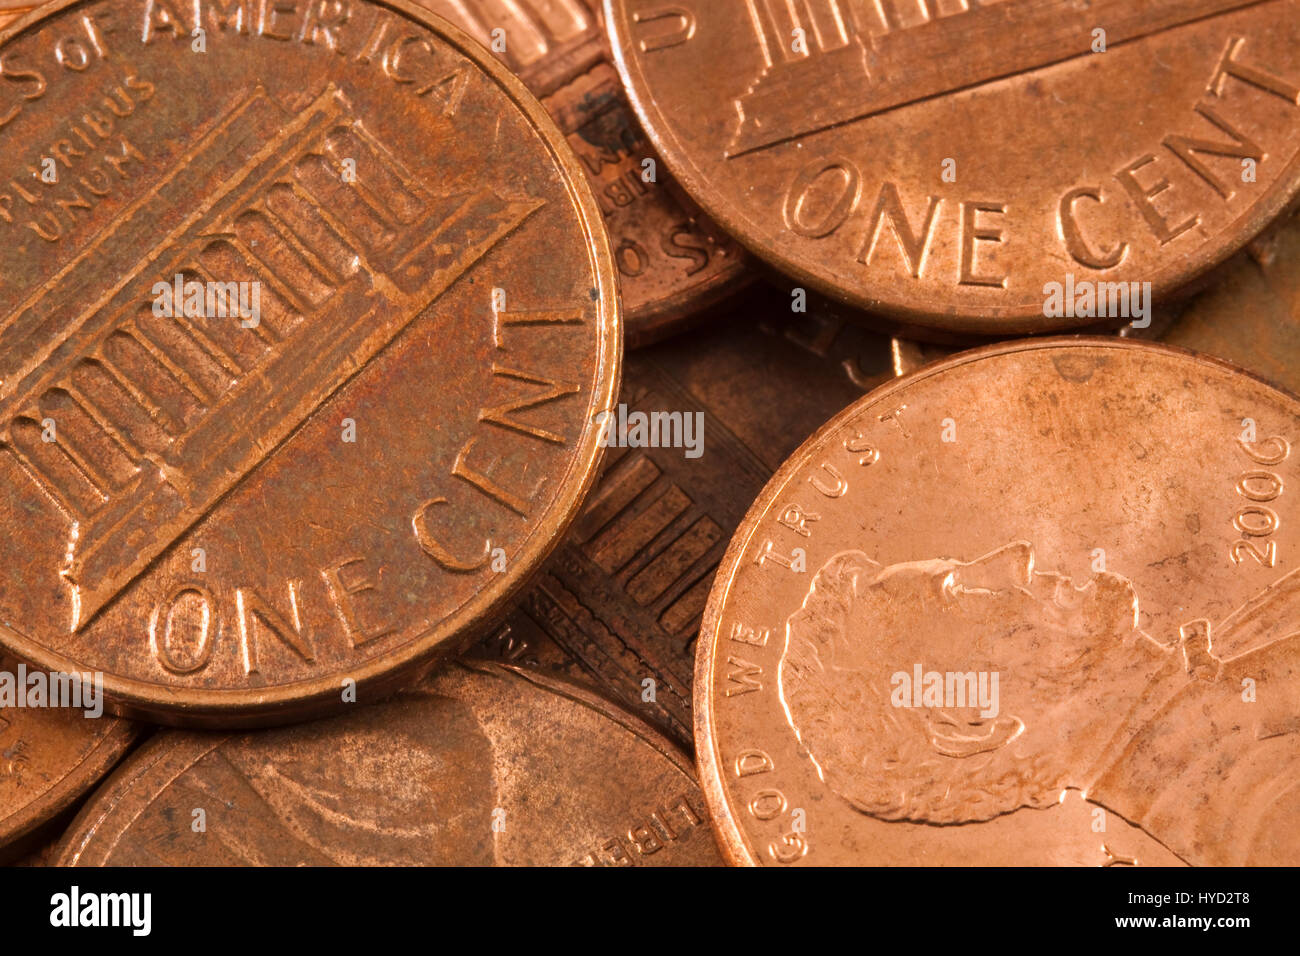 Pennies - A large number of coins Stock Photo